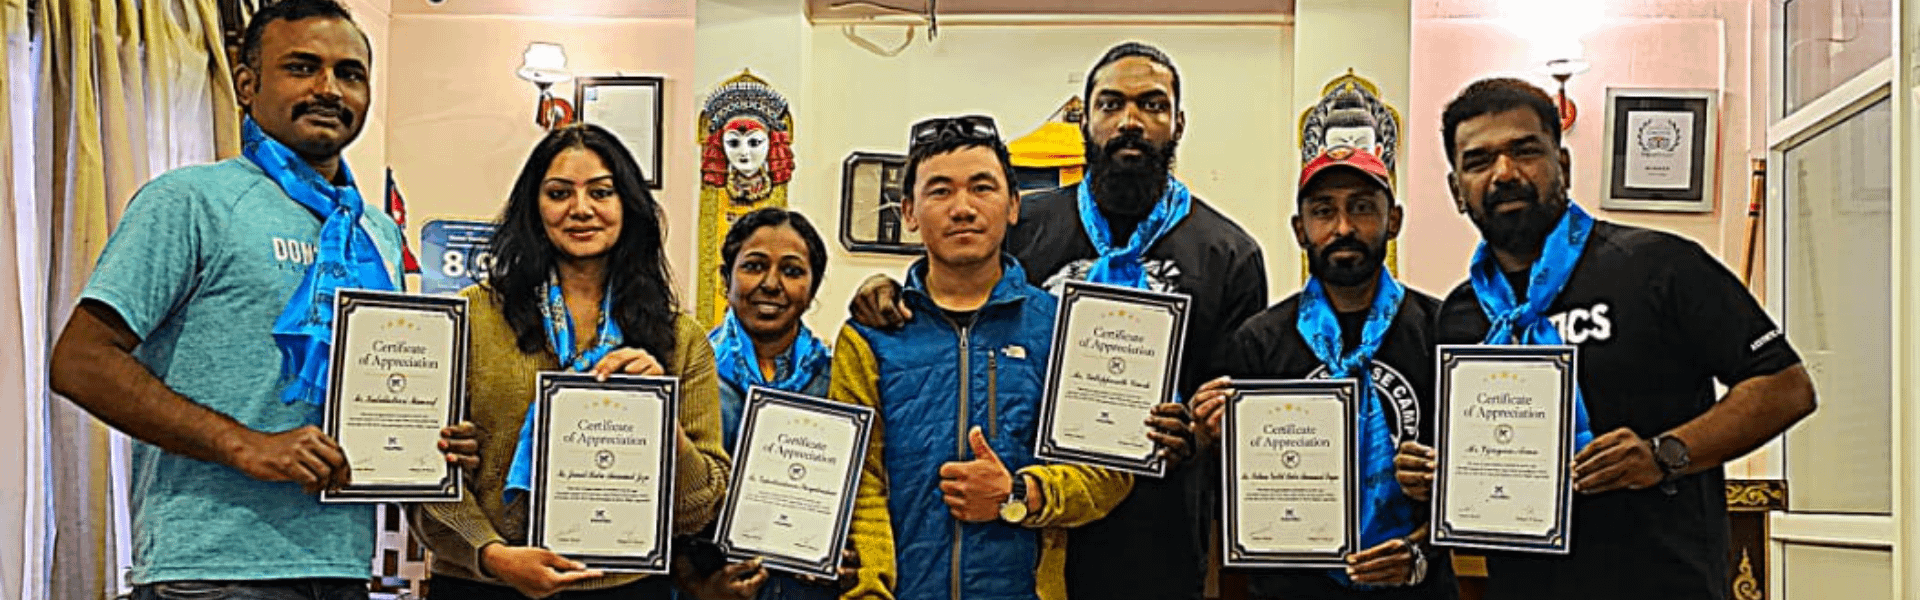 “🏔️ Honoring Achievement: Our Executive Director, Mingma D Sherpa, Presents Certificates of Appreciation to Our Valued Clients 🏅